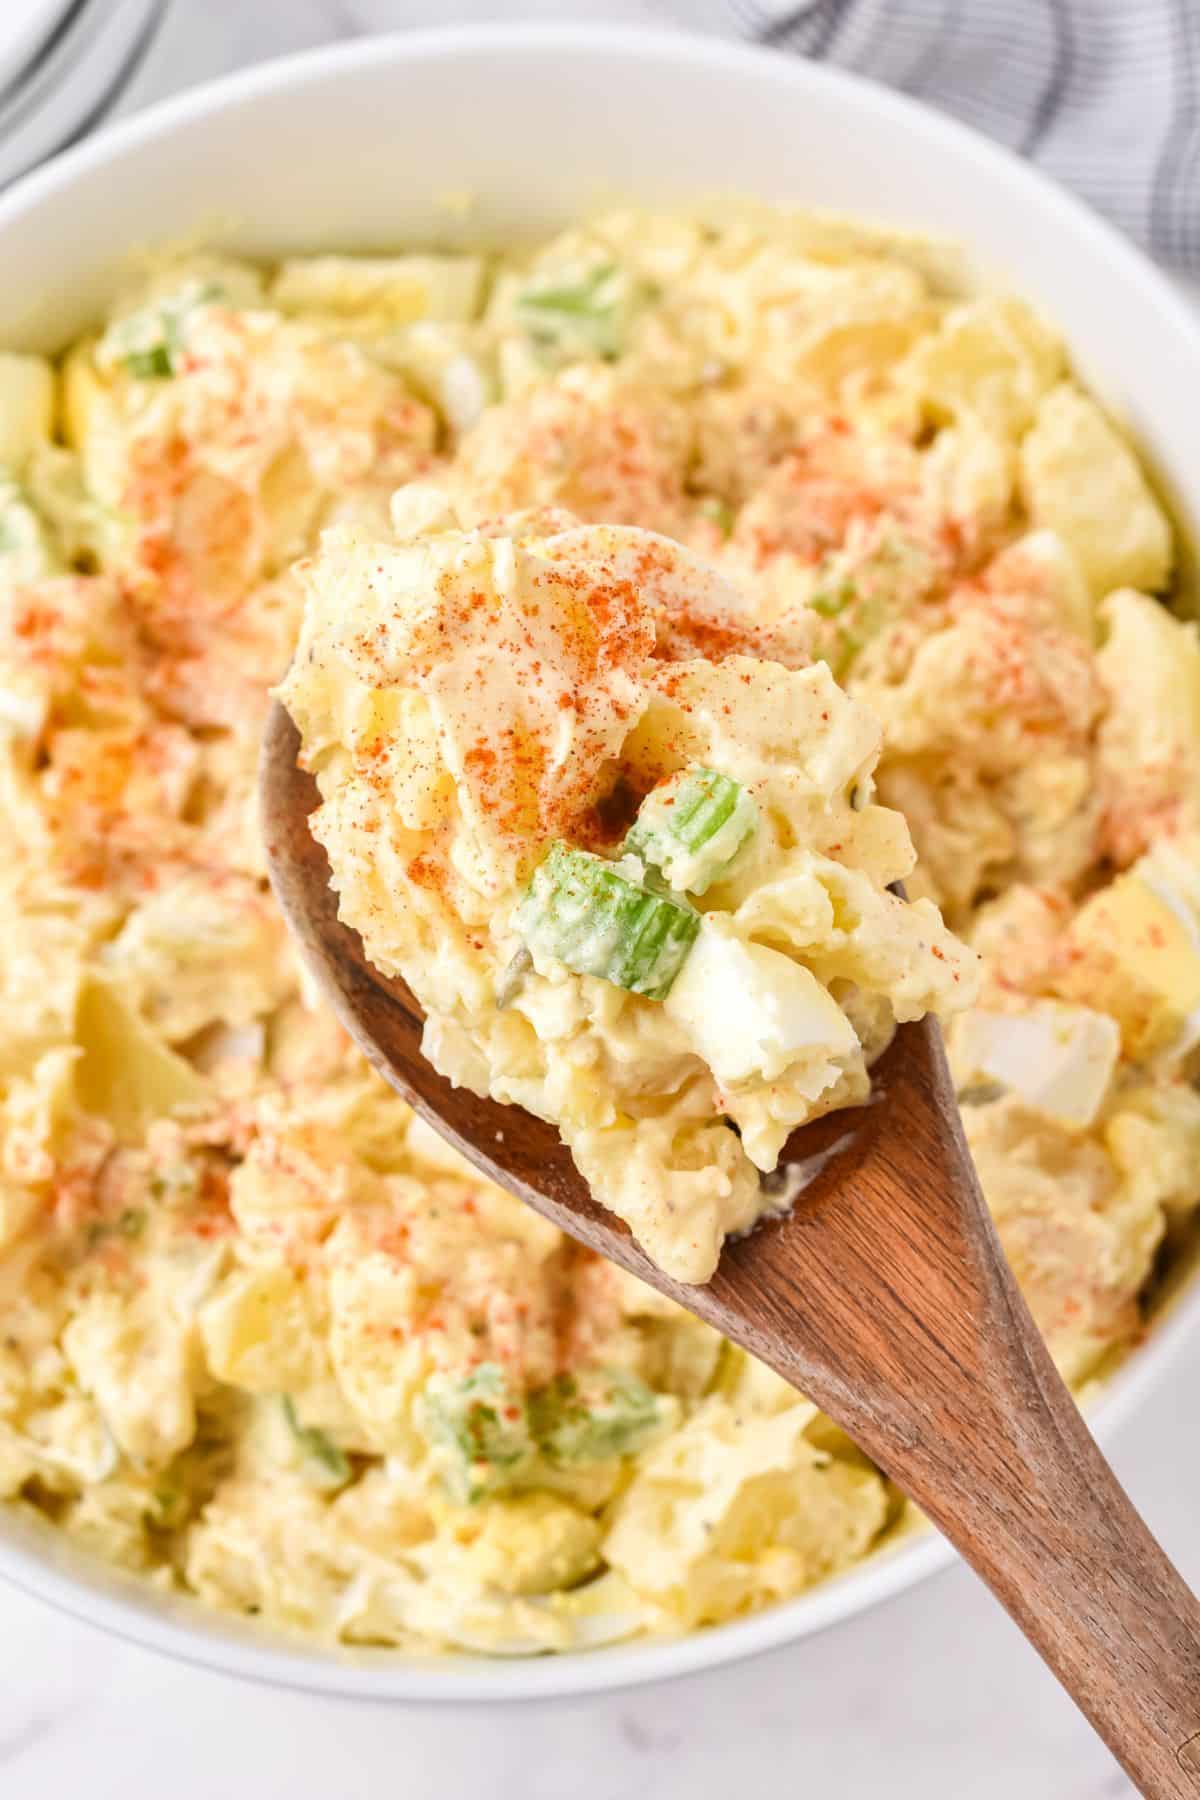 yellow potato salad with paprika and chopped celery on wooden spoon